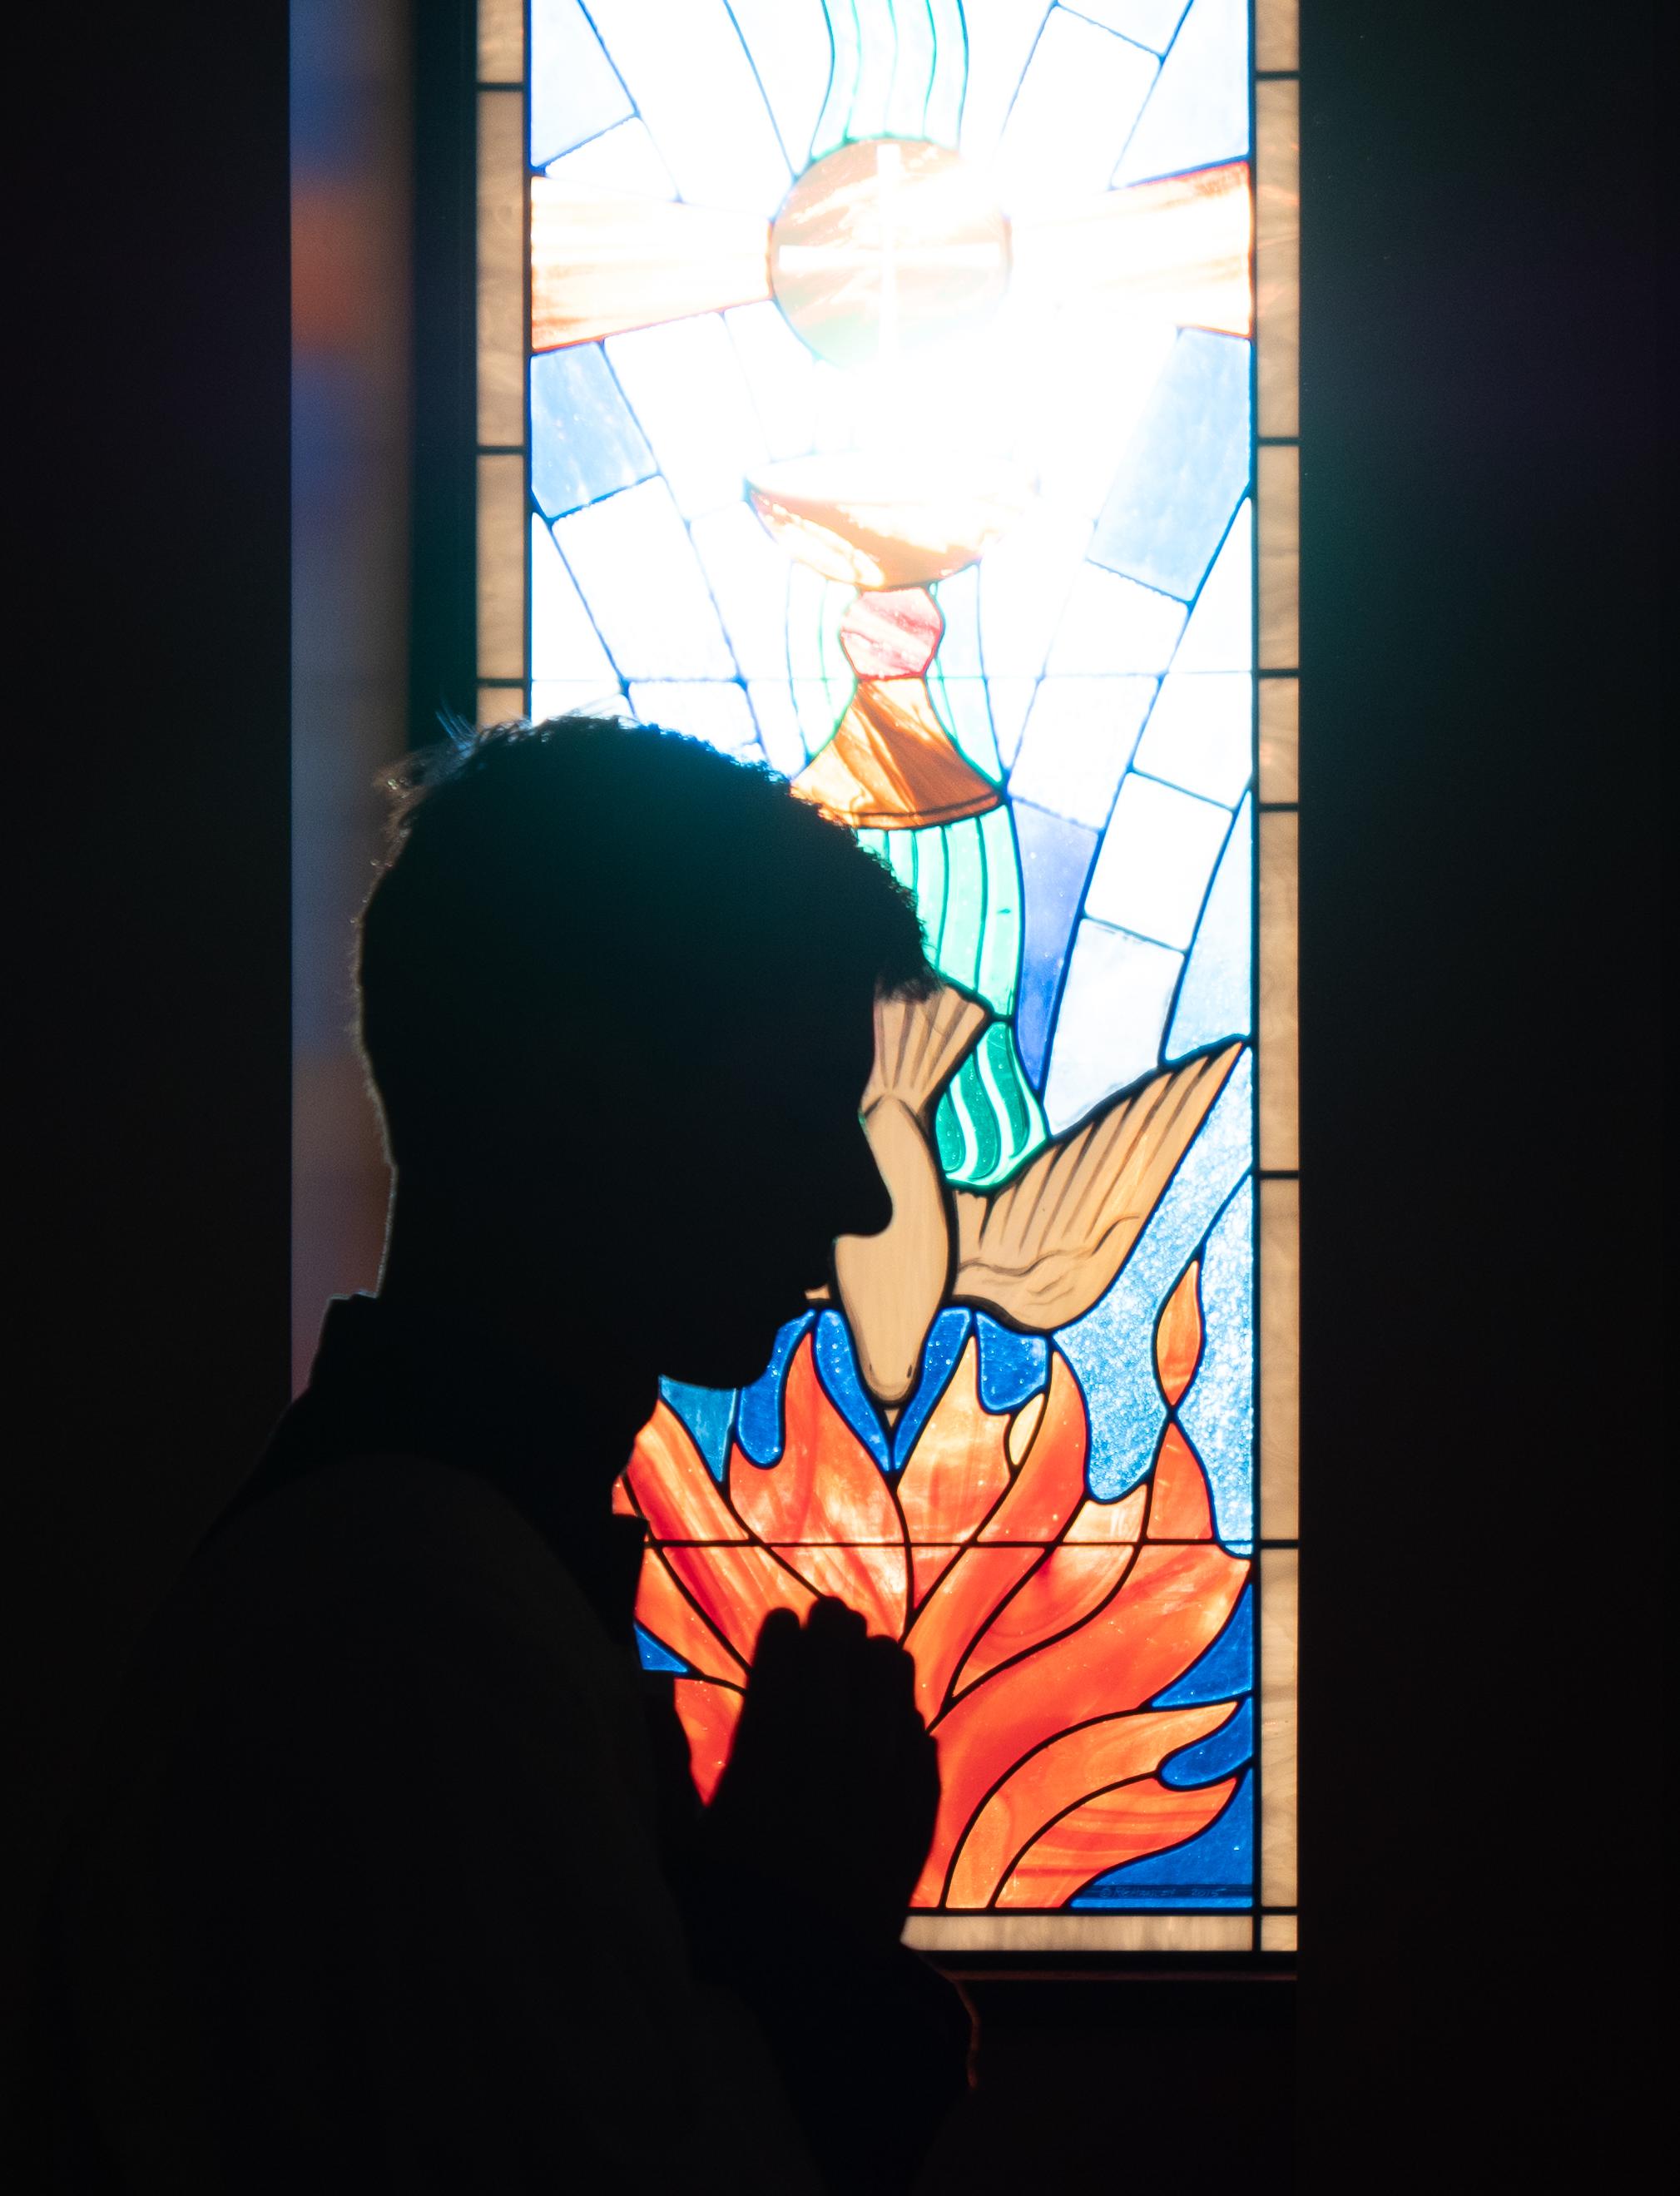 An altar boy silhouetted at the window